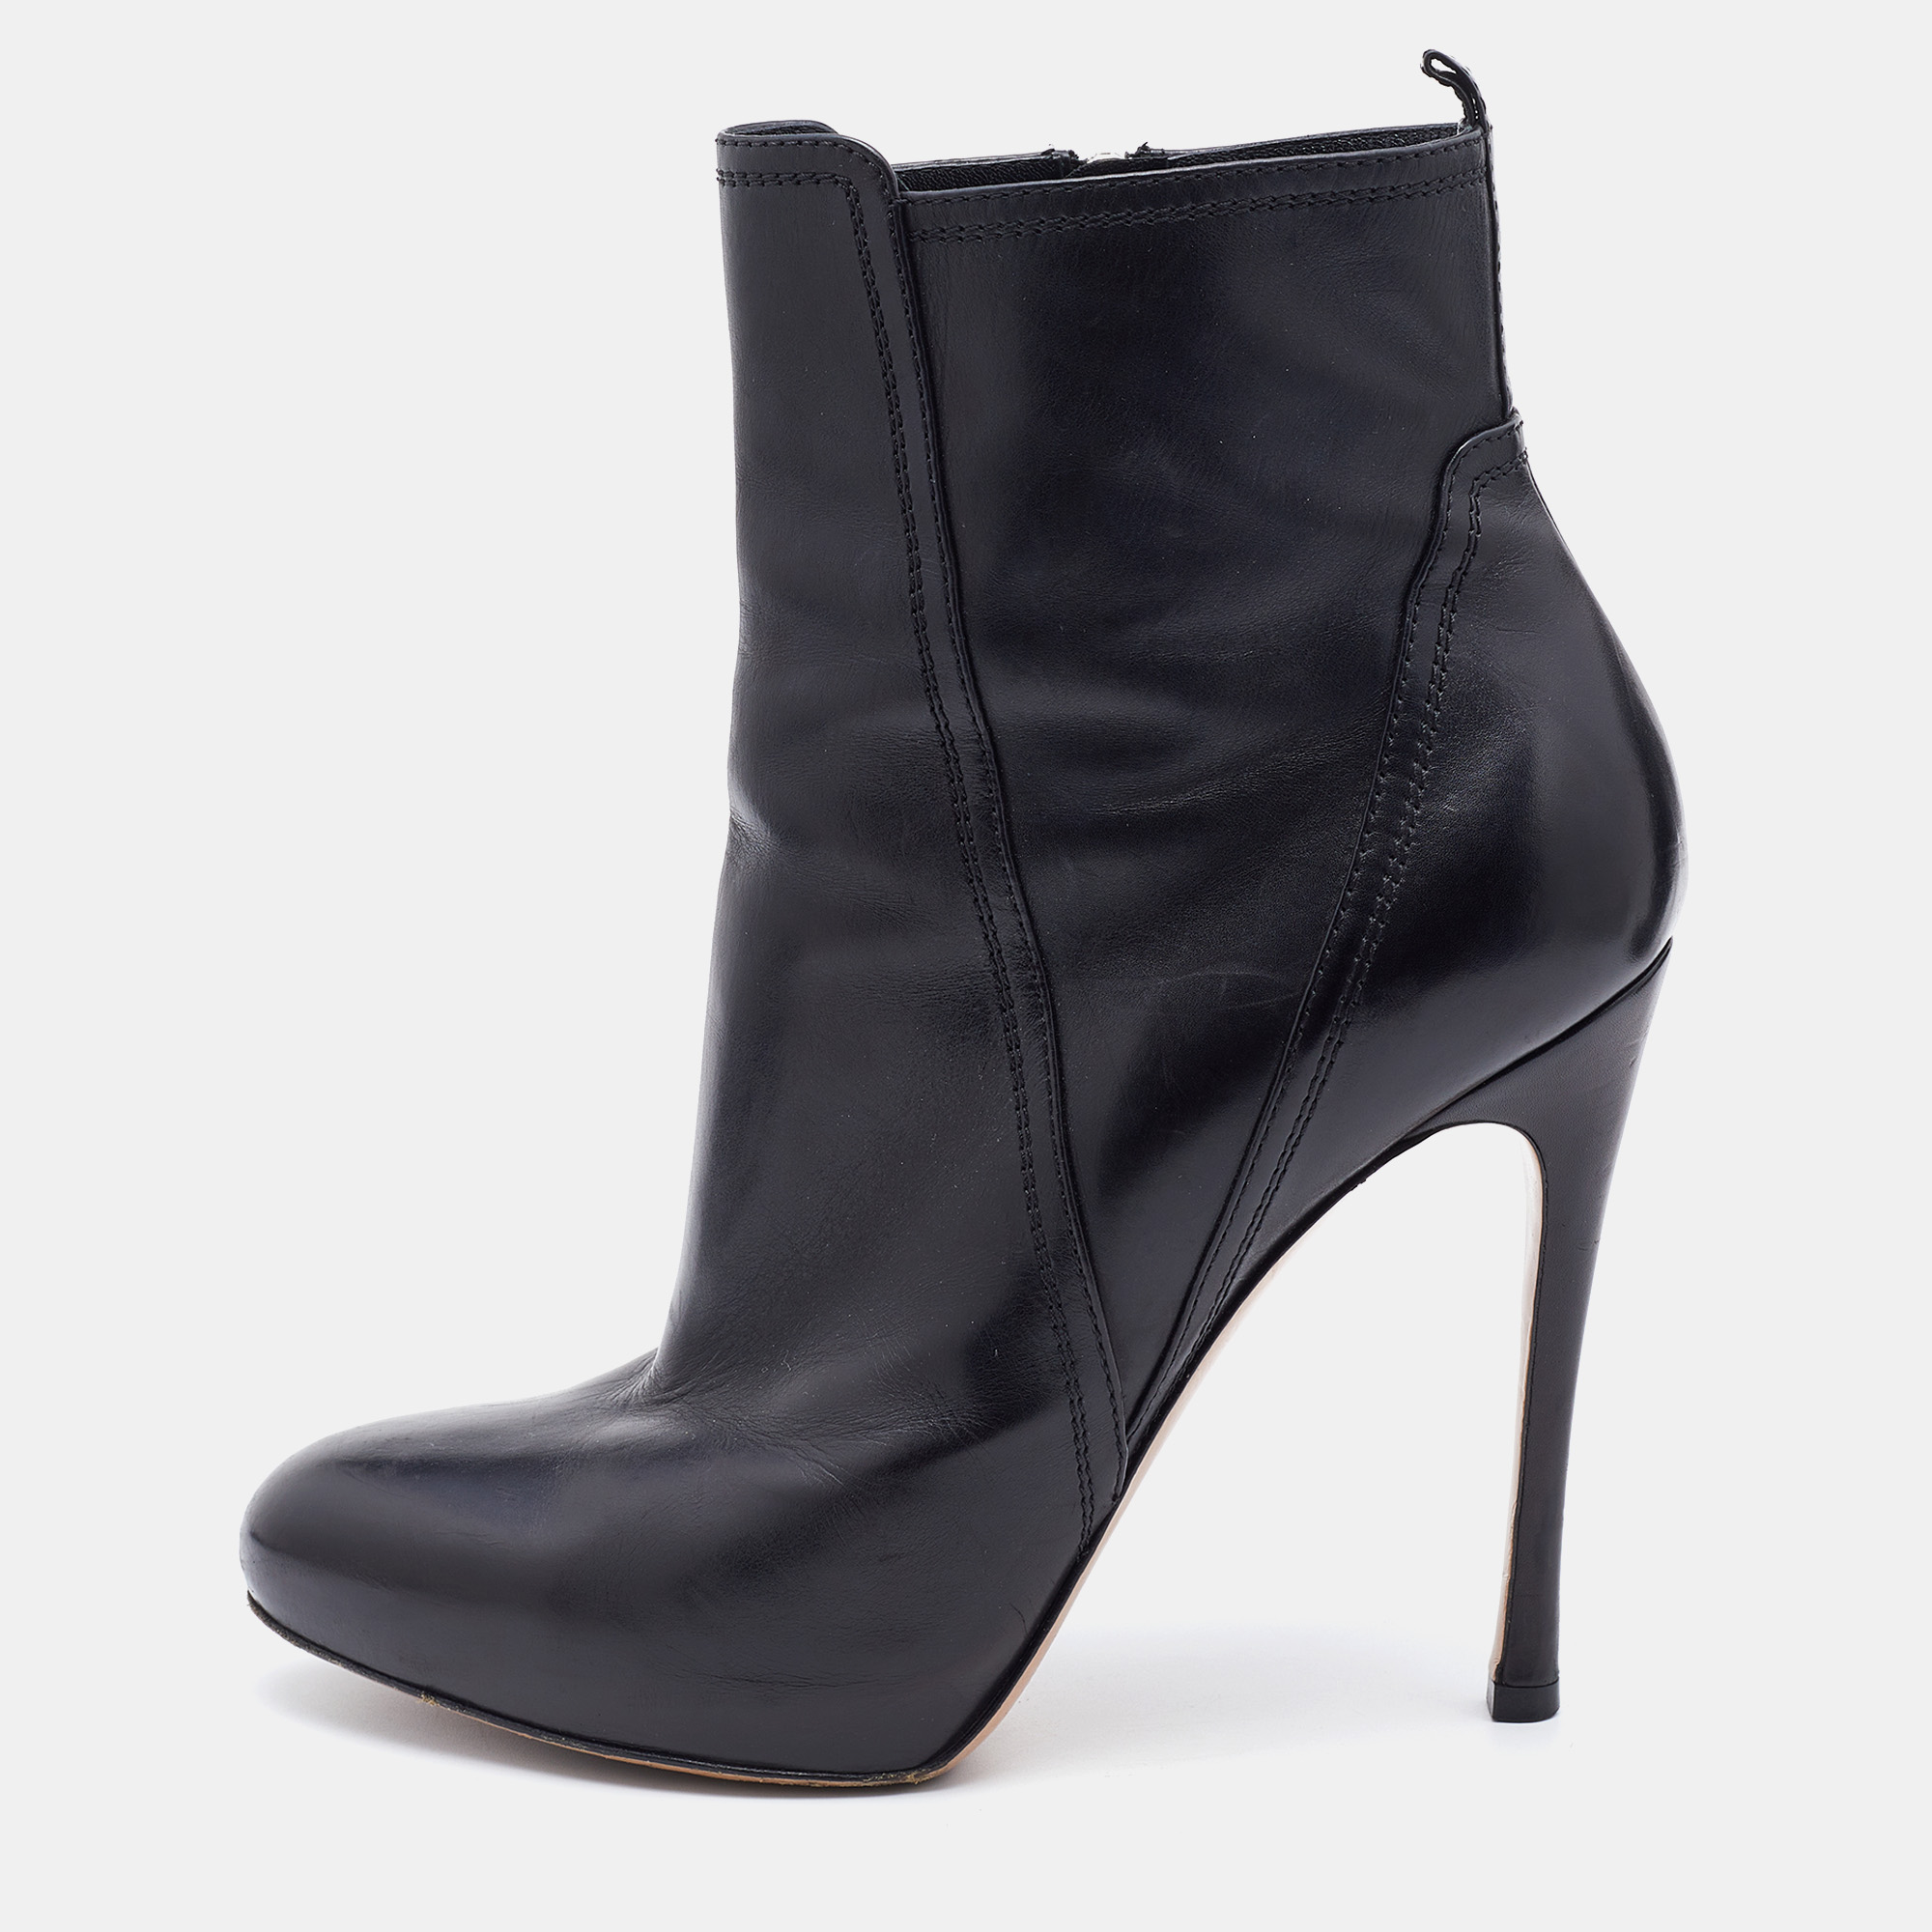 gianvito rossi black leather ankle length boots size 38.5